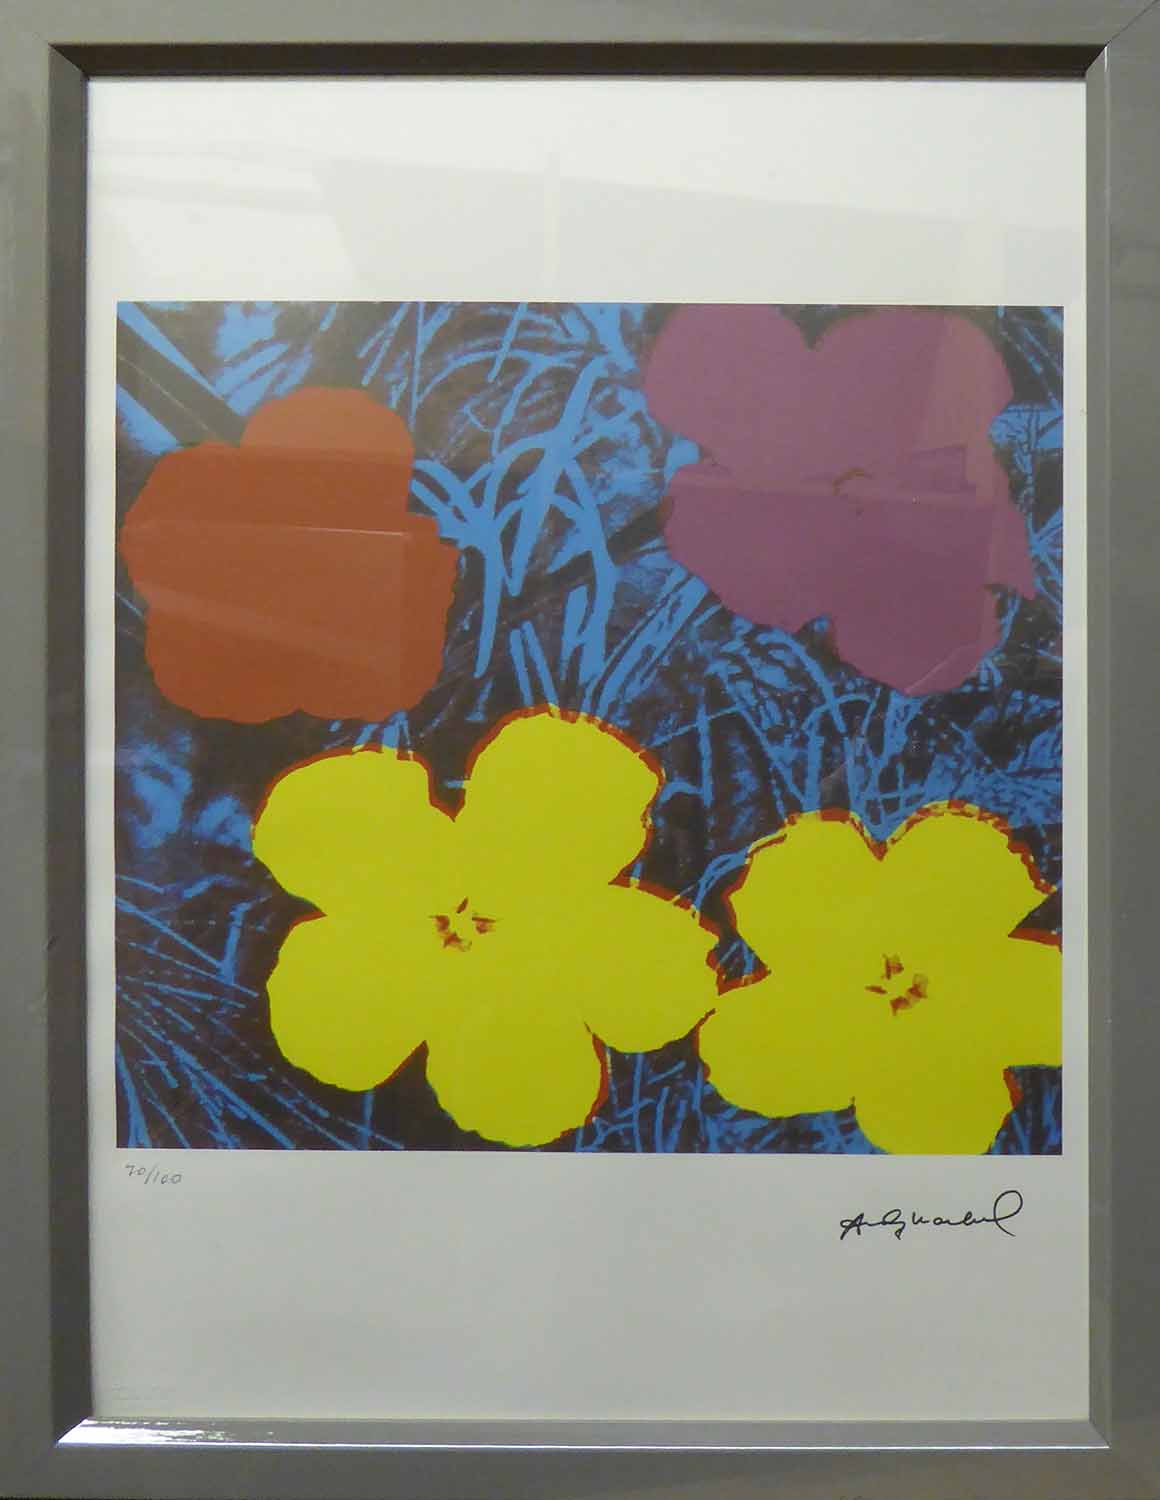 ANDY WARHOL 'Flowers', lithographic print, on Arches paper,